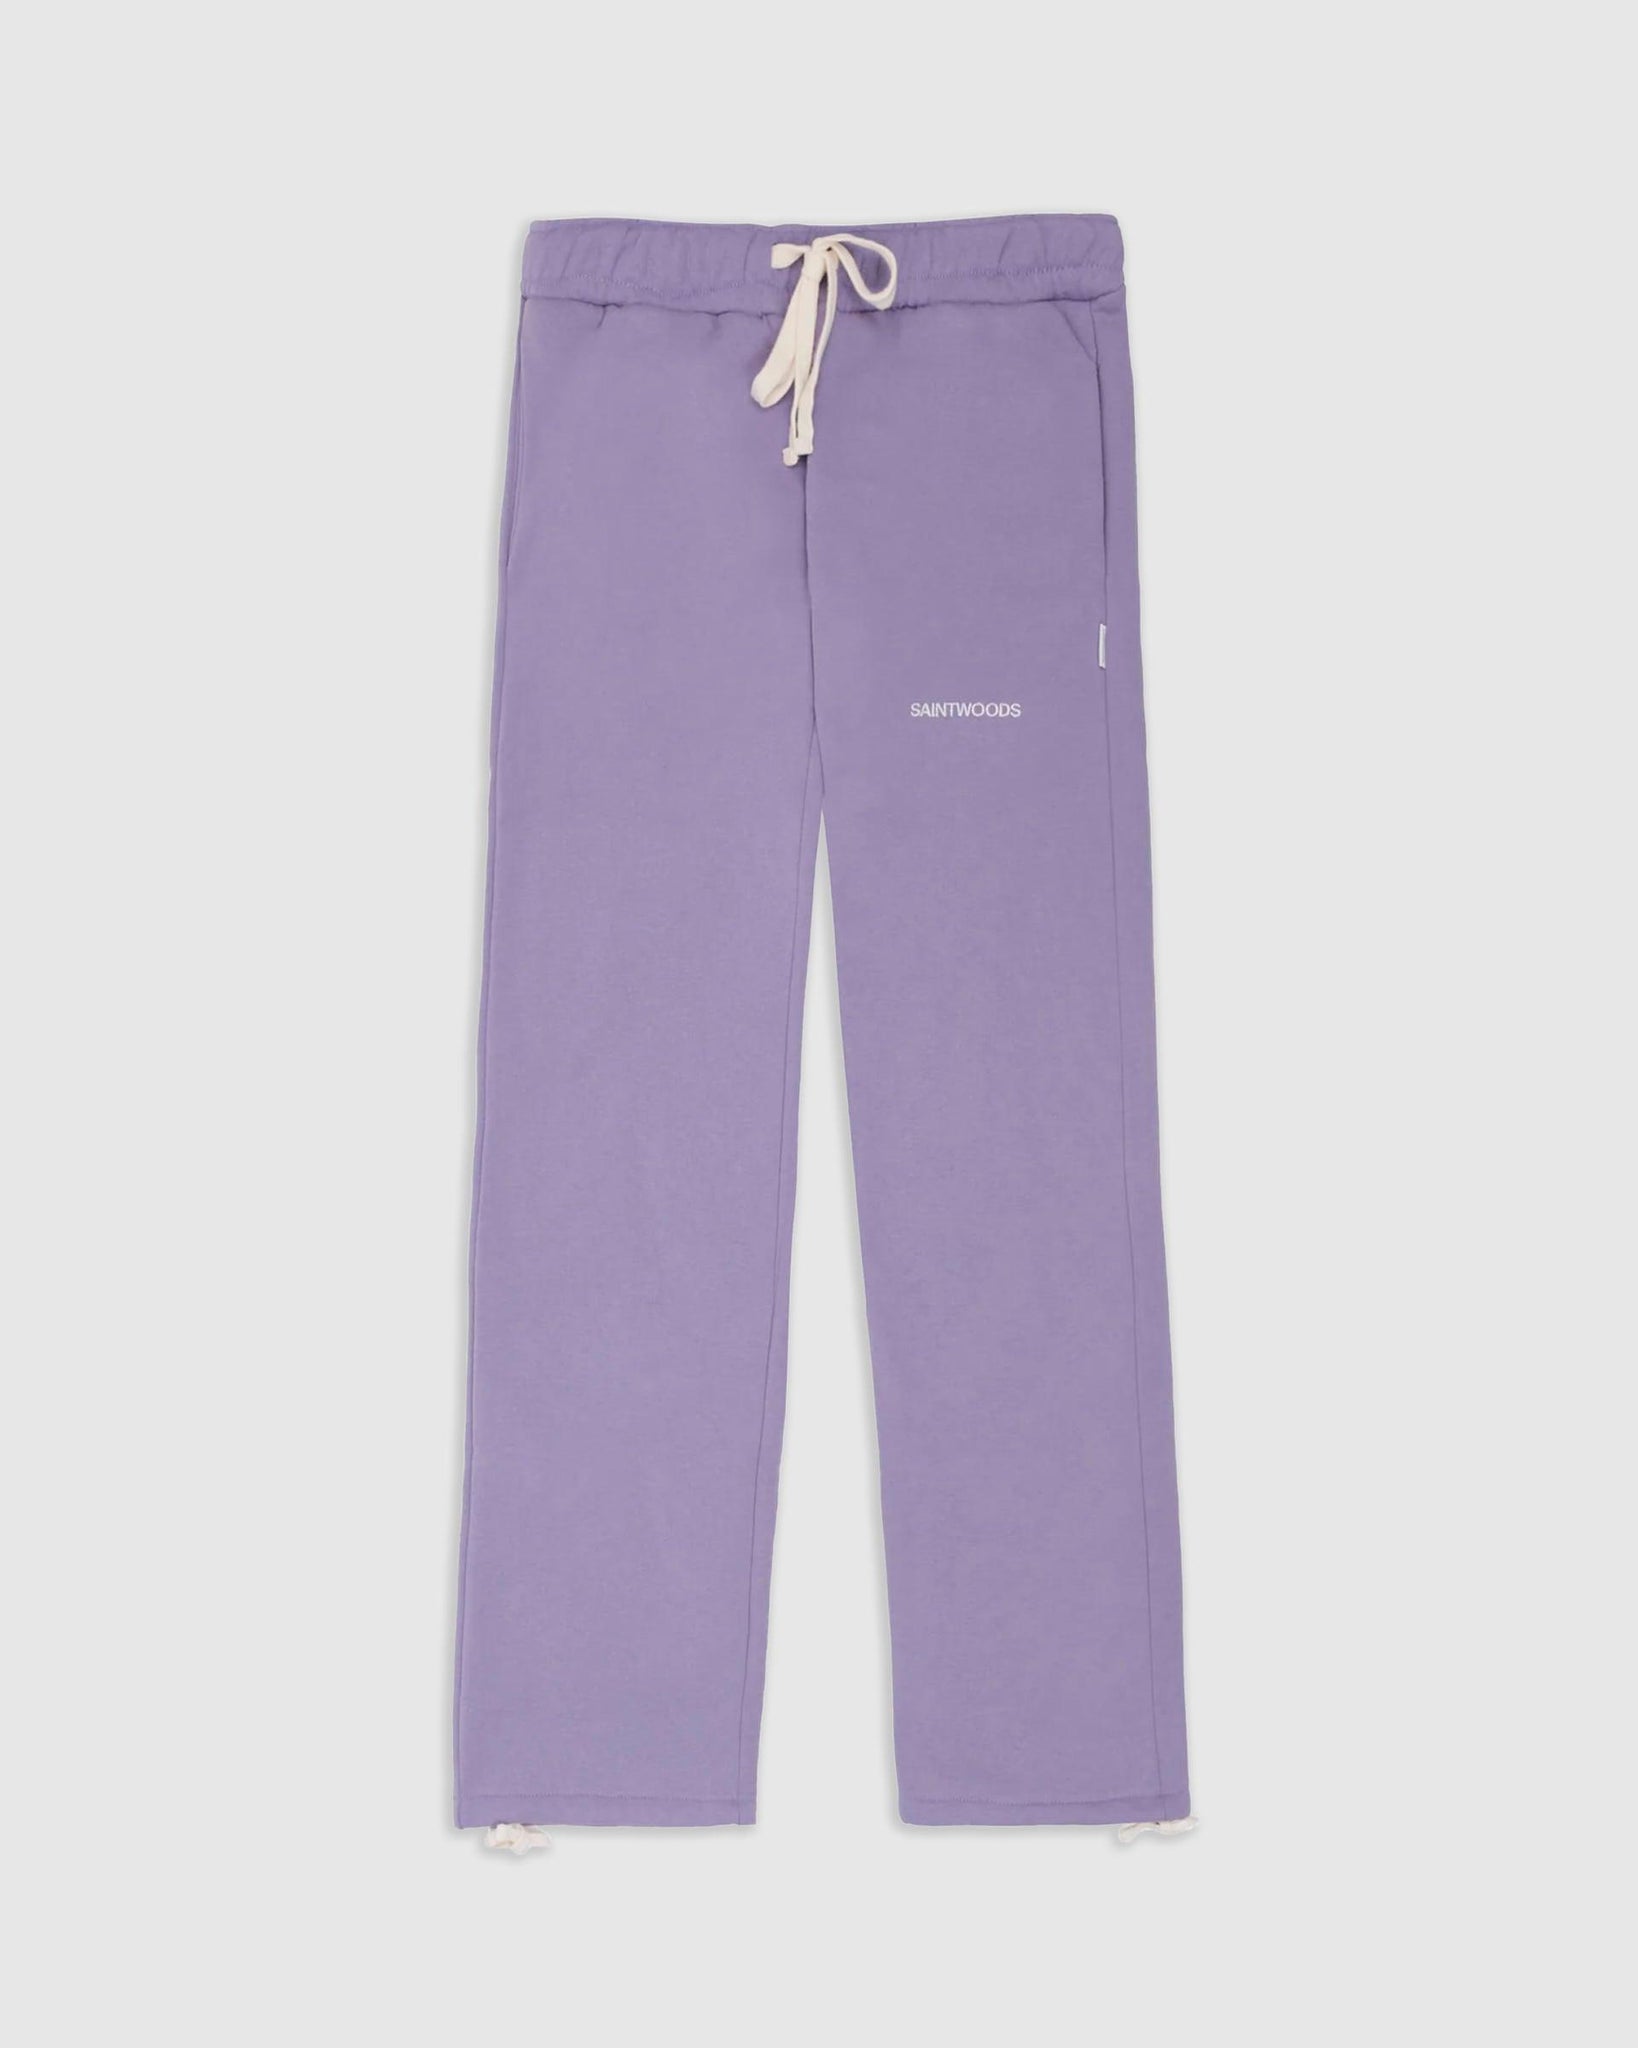 Lavender Sweatpants - {{ collection.title }} - Chinatown Country Club 